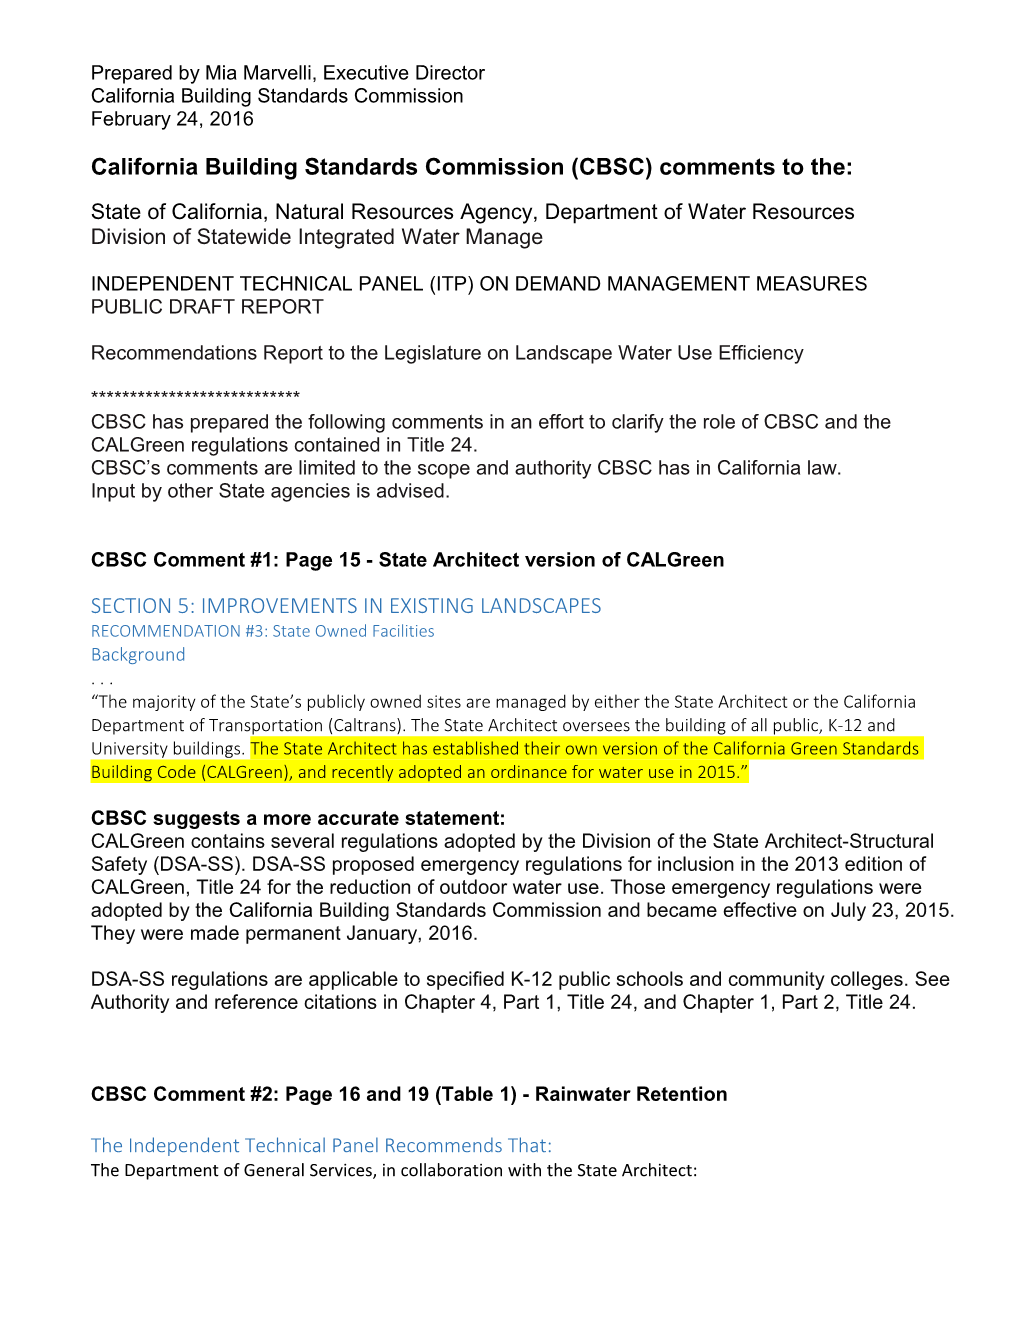 California Building Standards Commission (CBSC) Comments to The